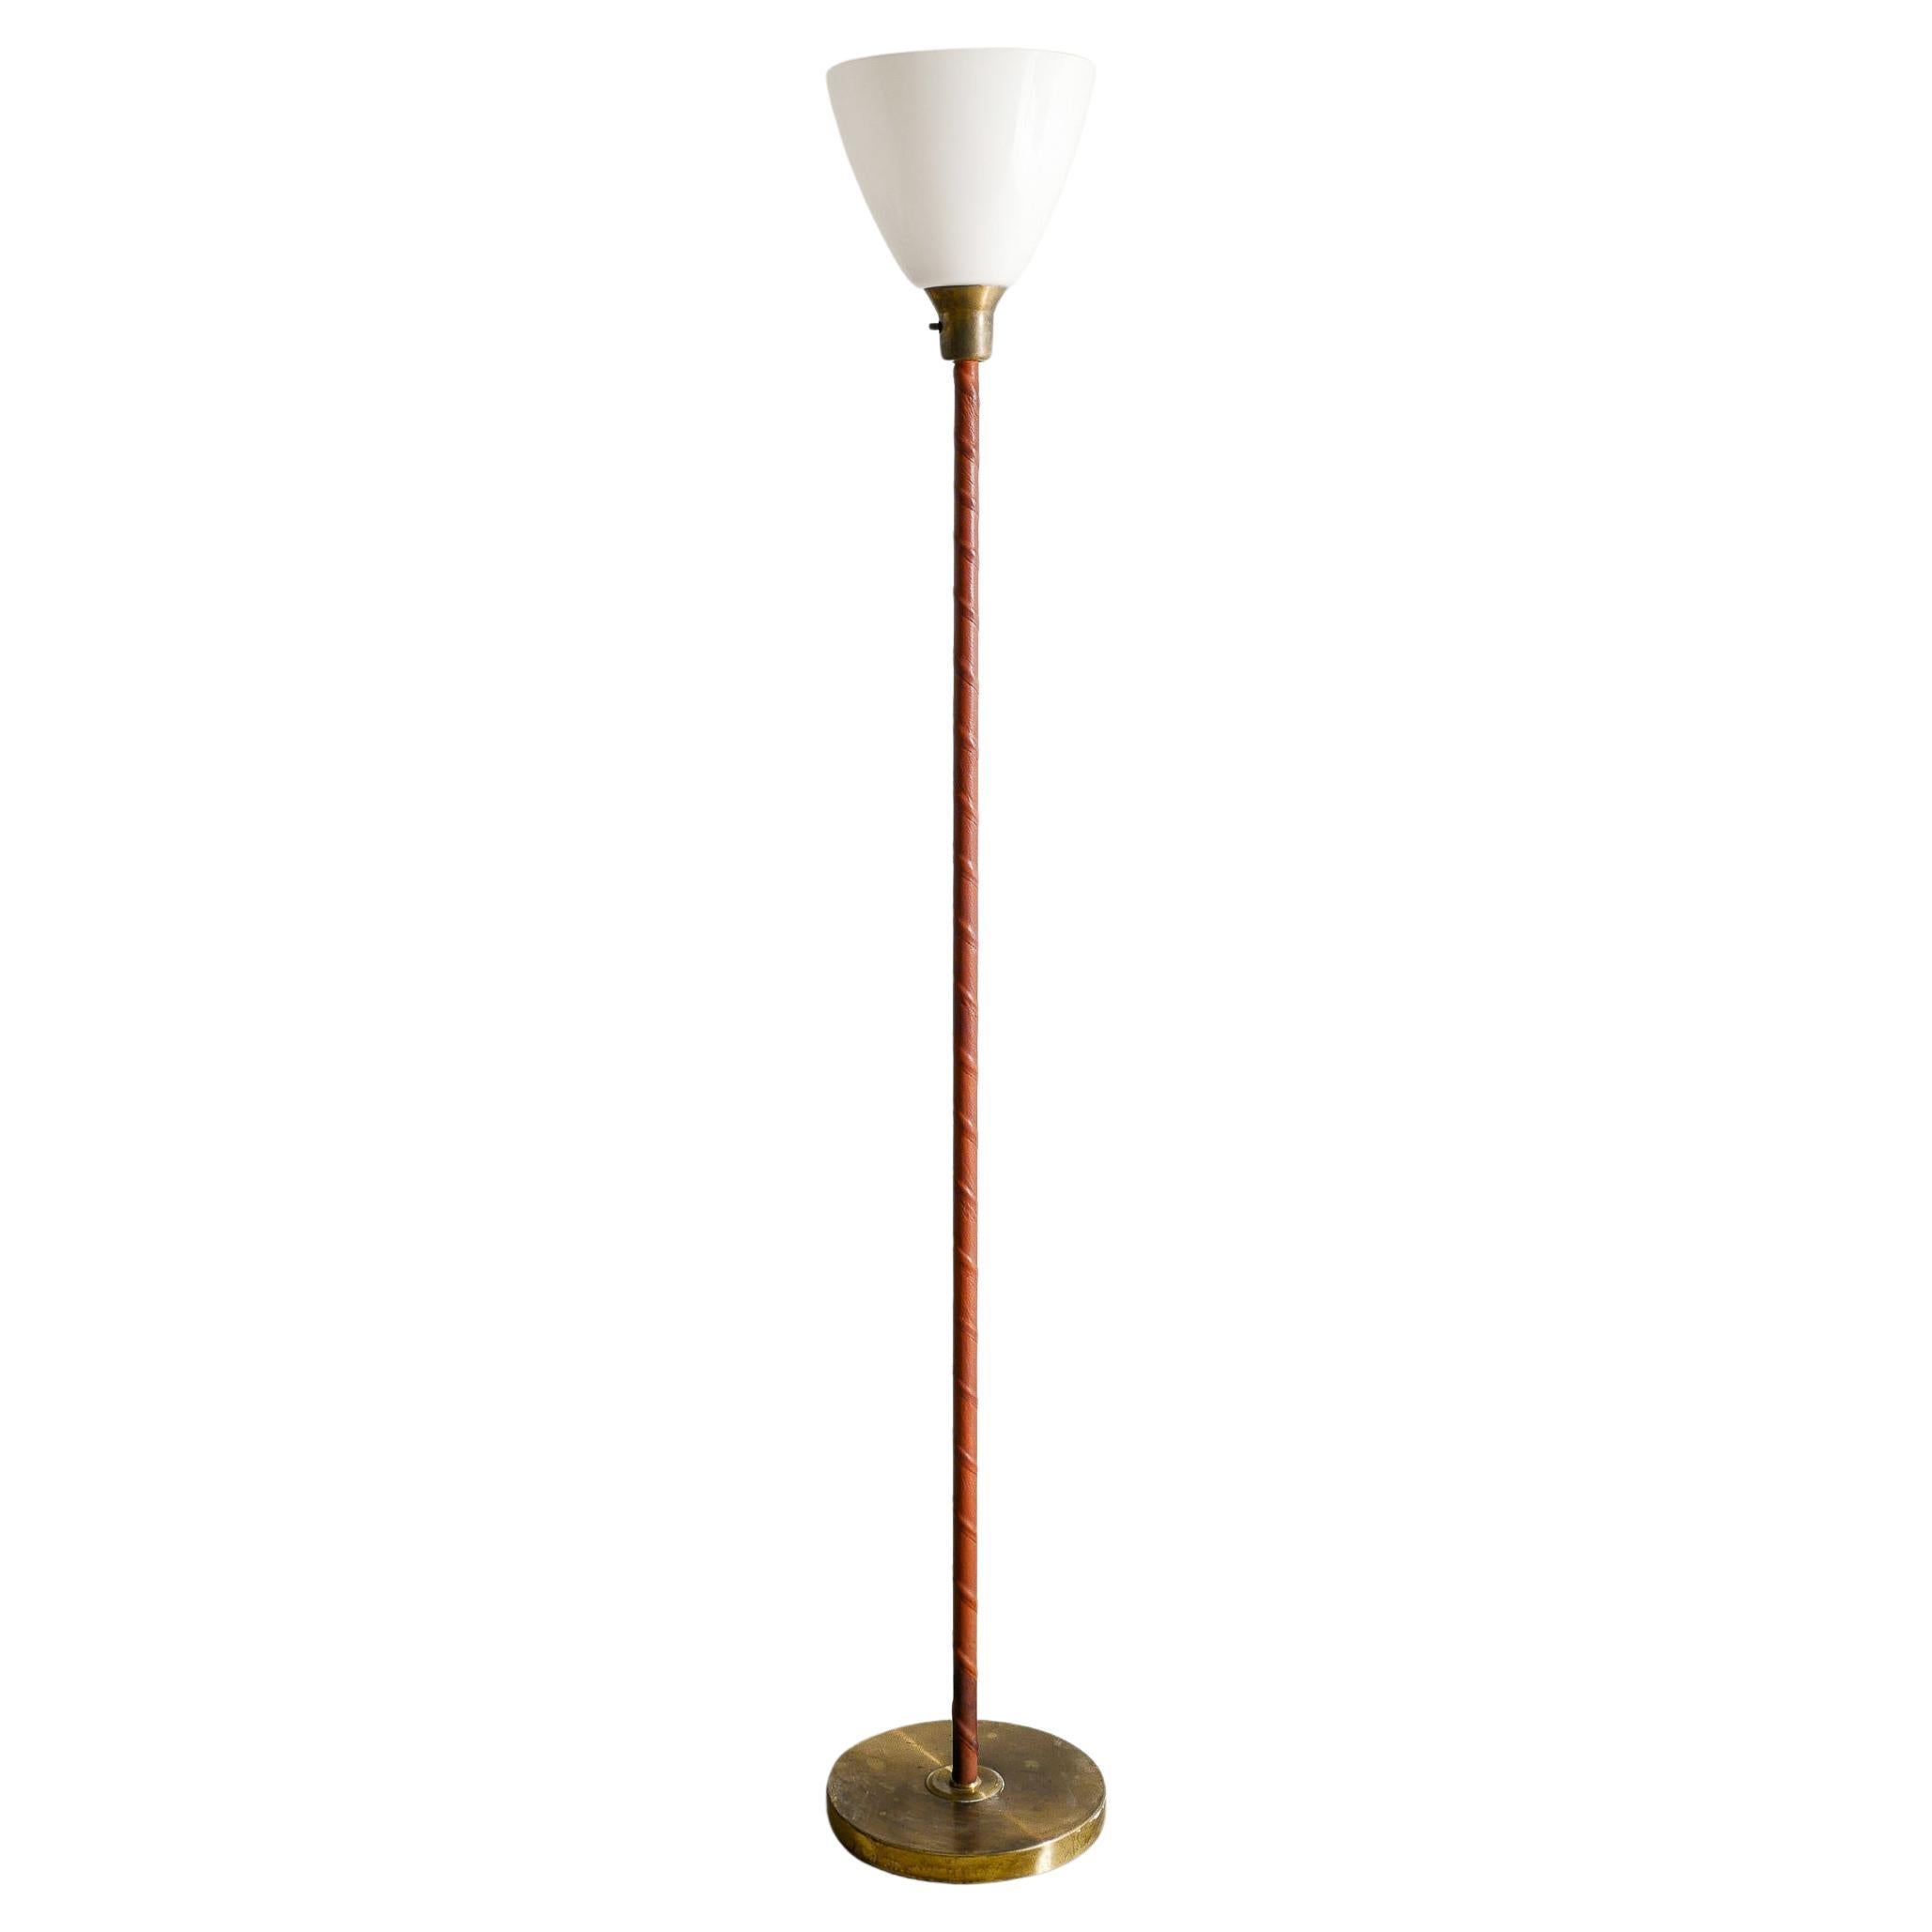 Swedish Mid Century Brass, Leather & Glass Uplight Floor Lamp Produced, 1950s For Sale